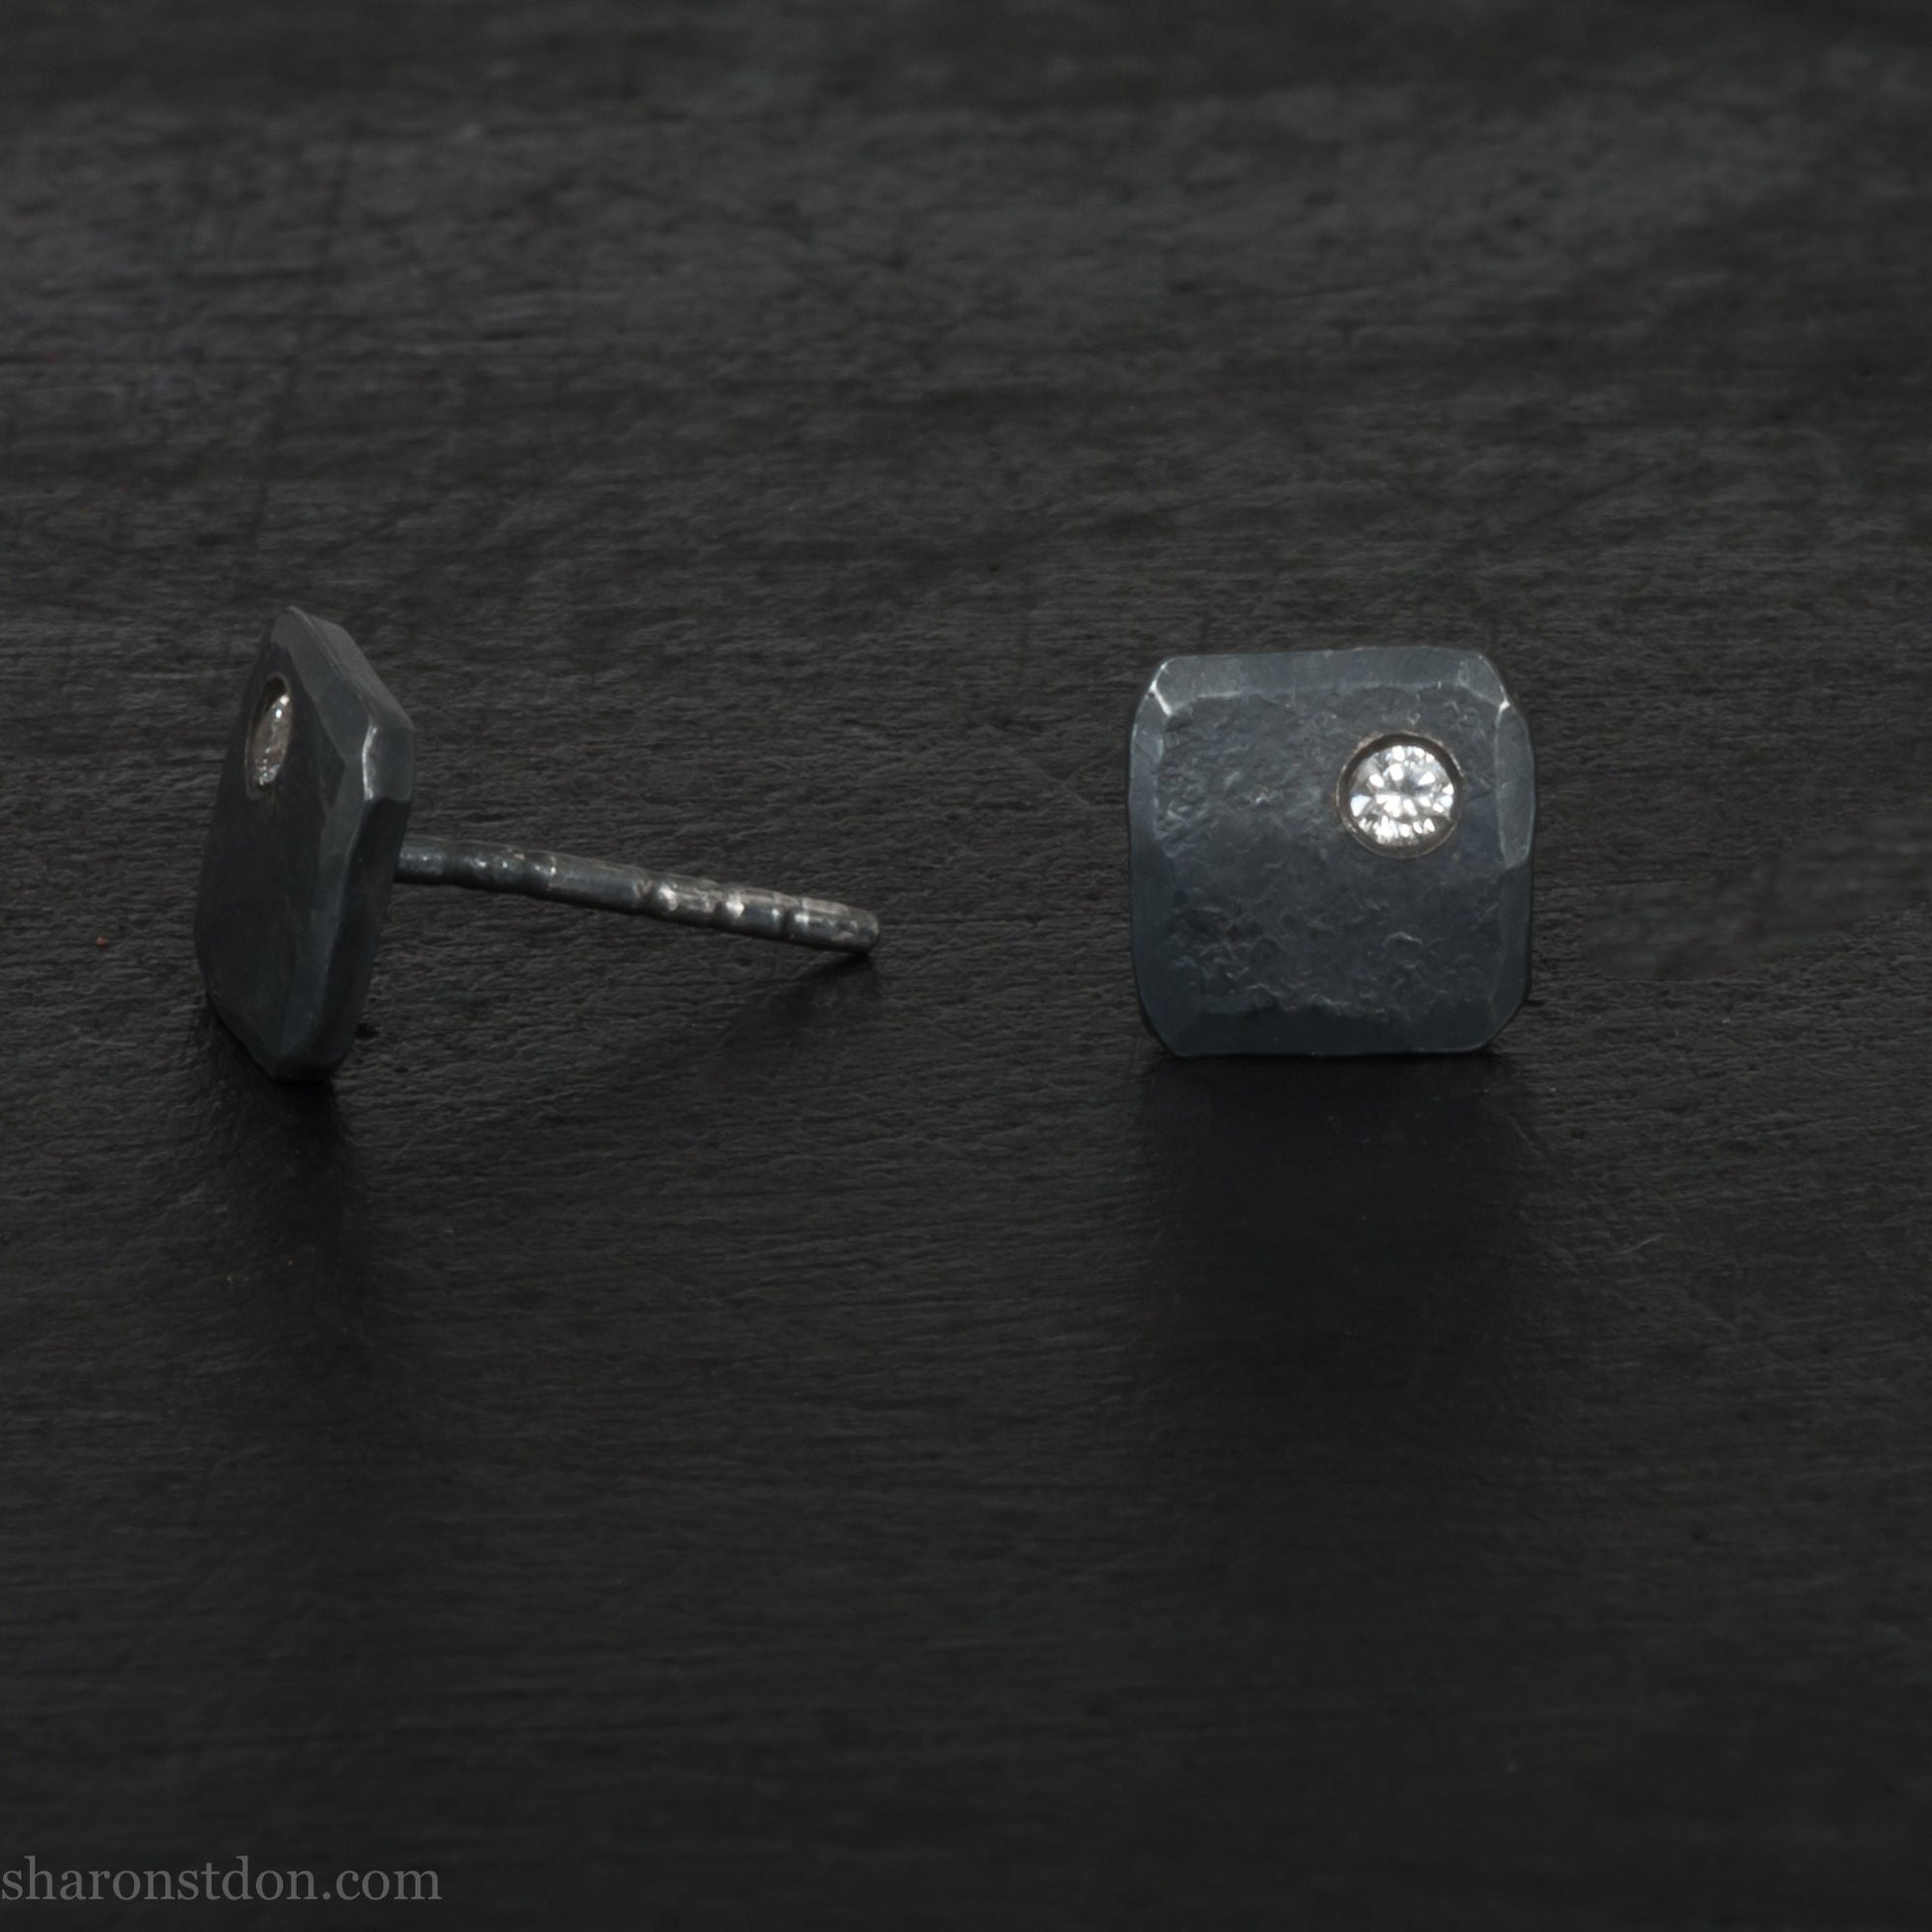 Imitation diamond and oxidized black 925 sterling silver stud earrings for men or women, non binary | Handmade, 7mm square, hammered silver